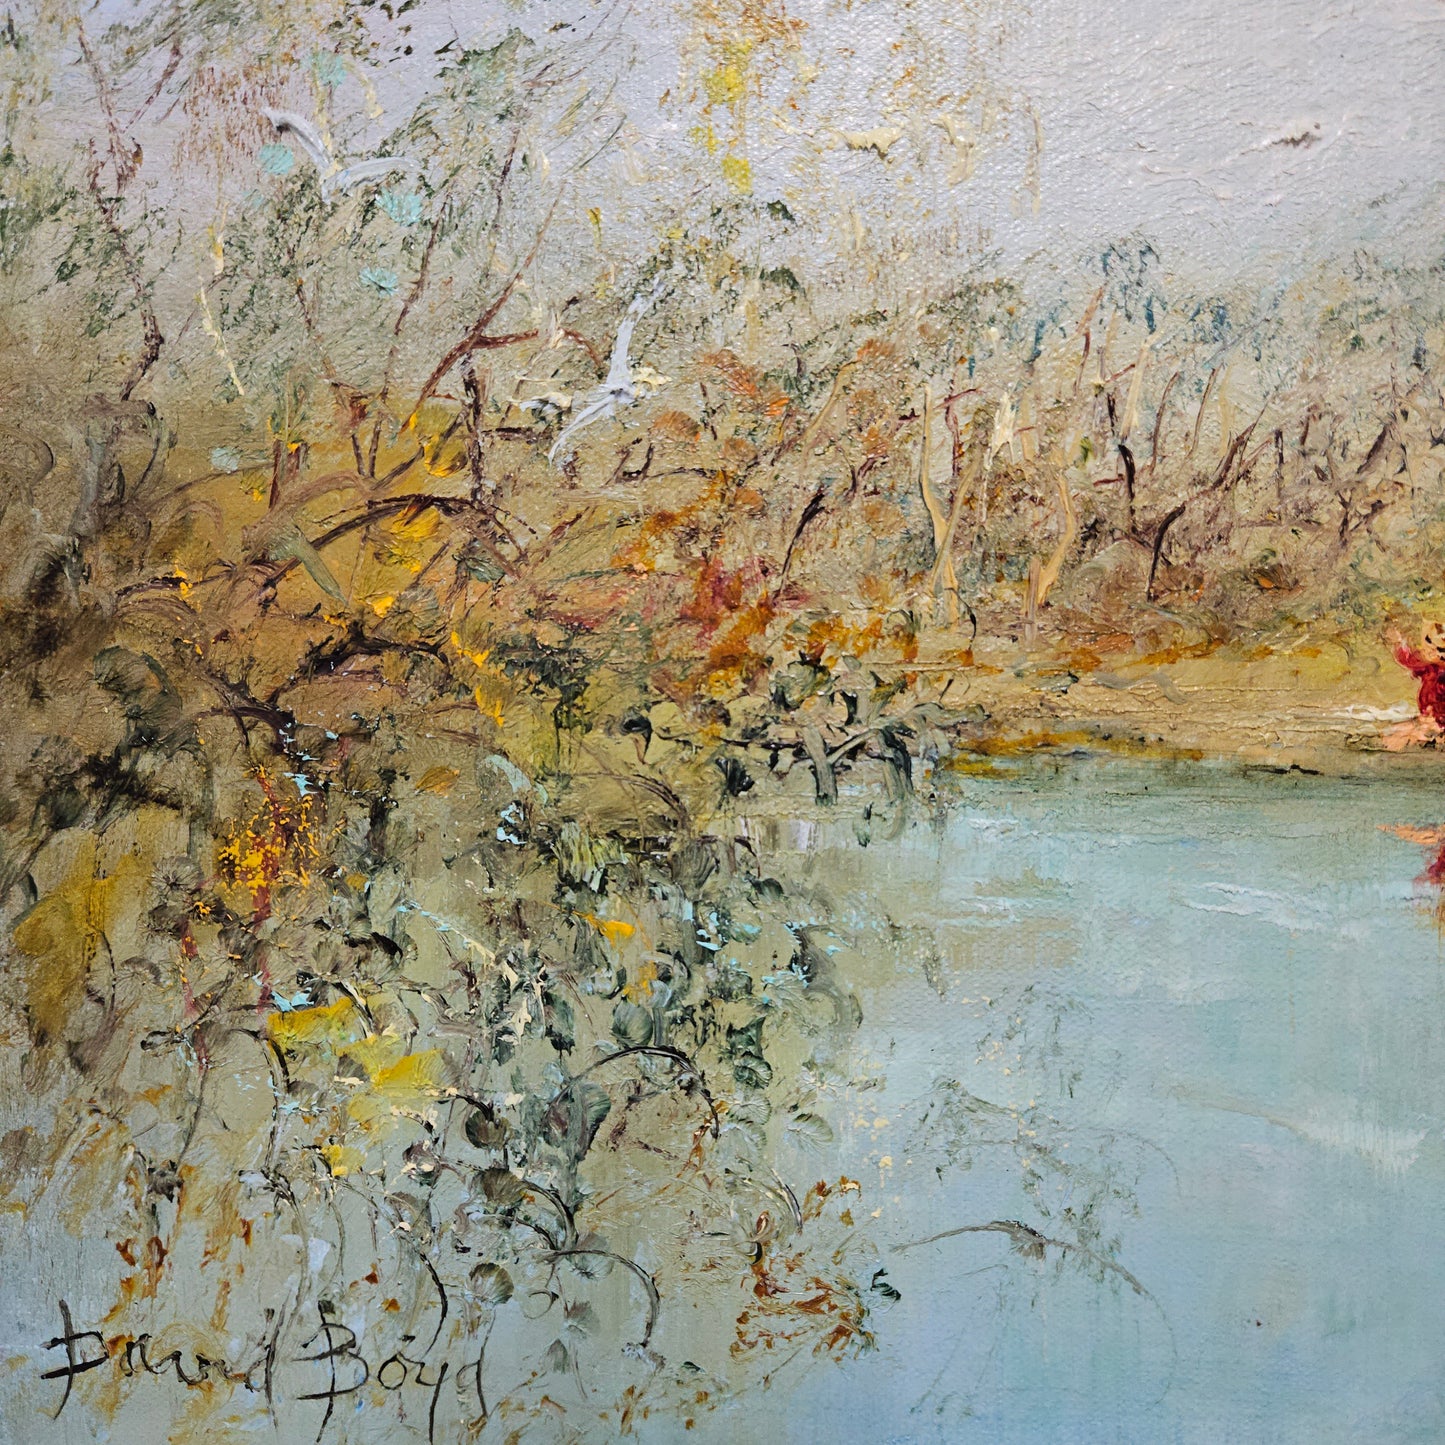 David Boyd Oil on Canvas "Children playing by the River with Birds"